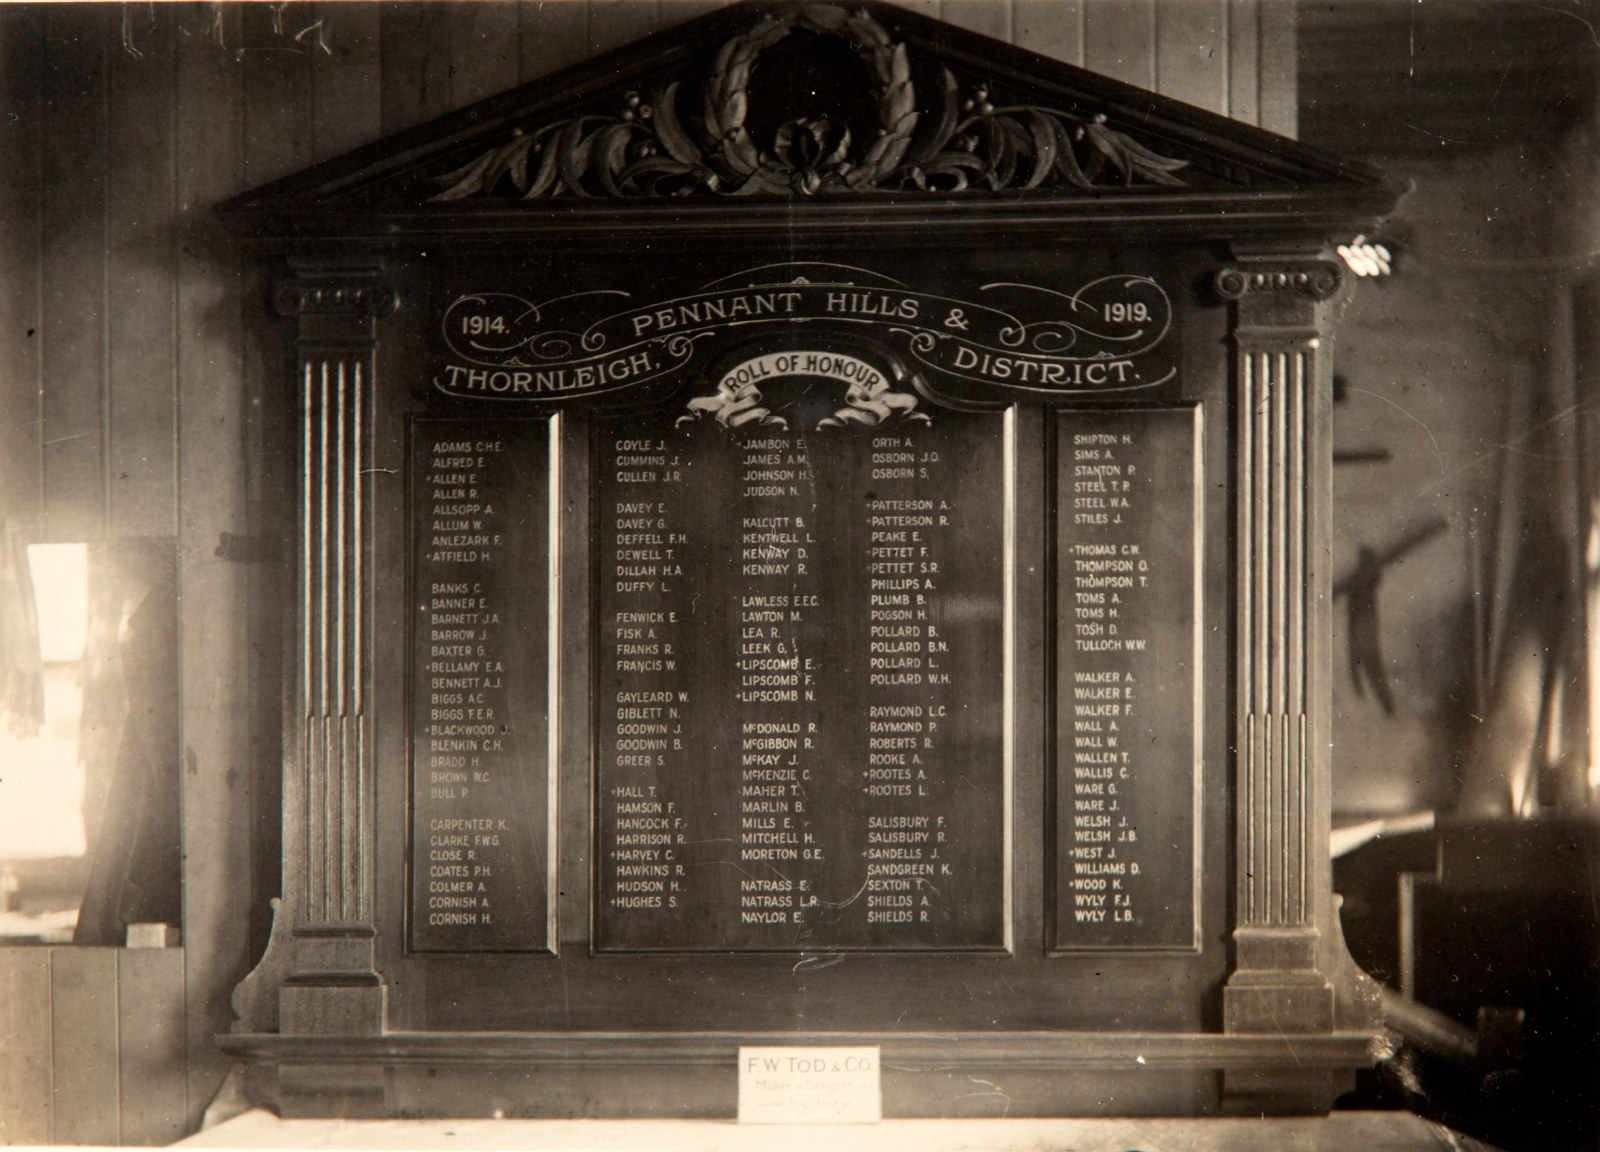 Photograph for Roll of Honour 1914-1918 for Pennant Hills & Thornleigh District designed by F.W. Tod & Co.